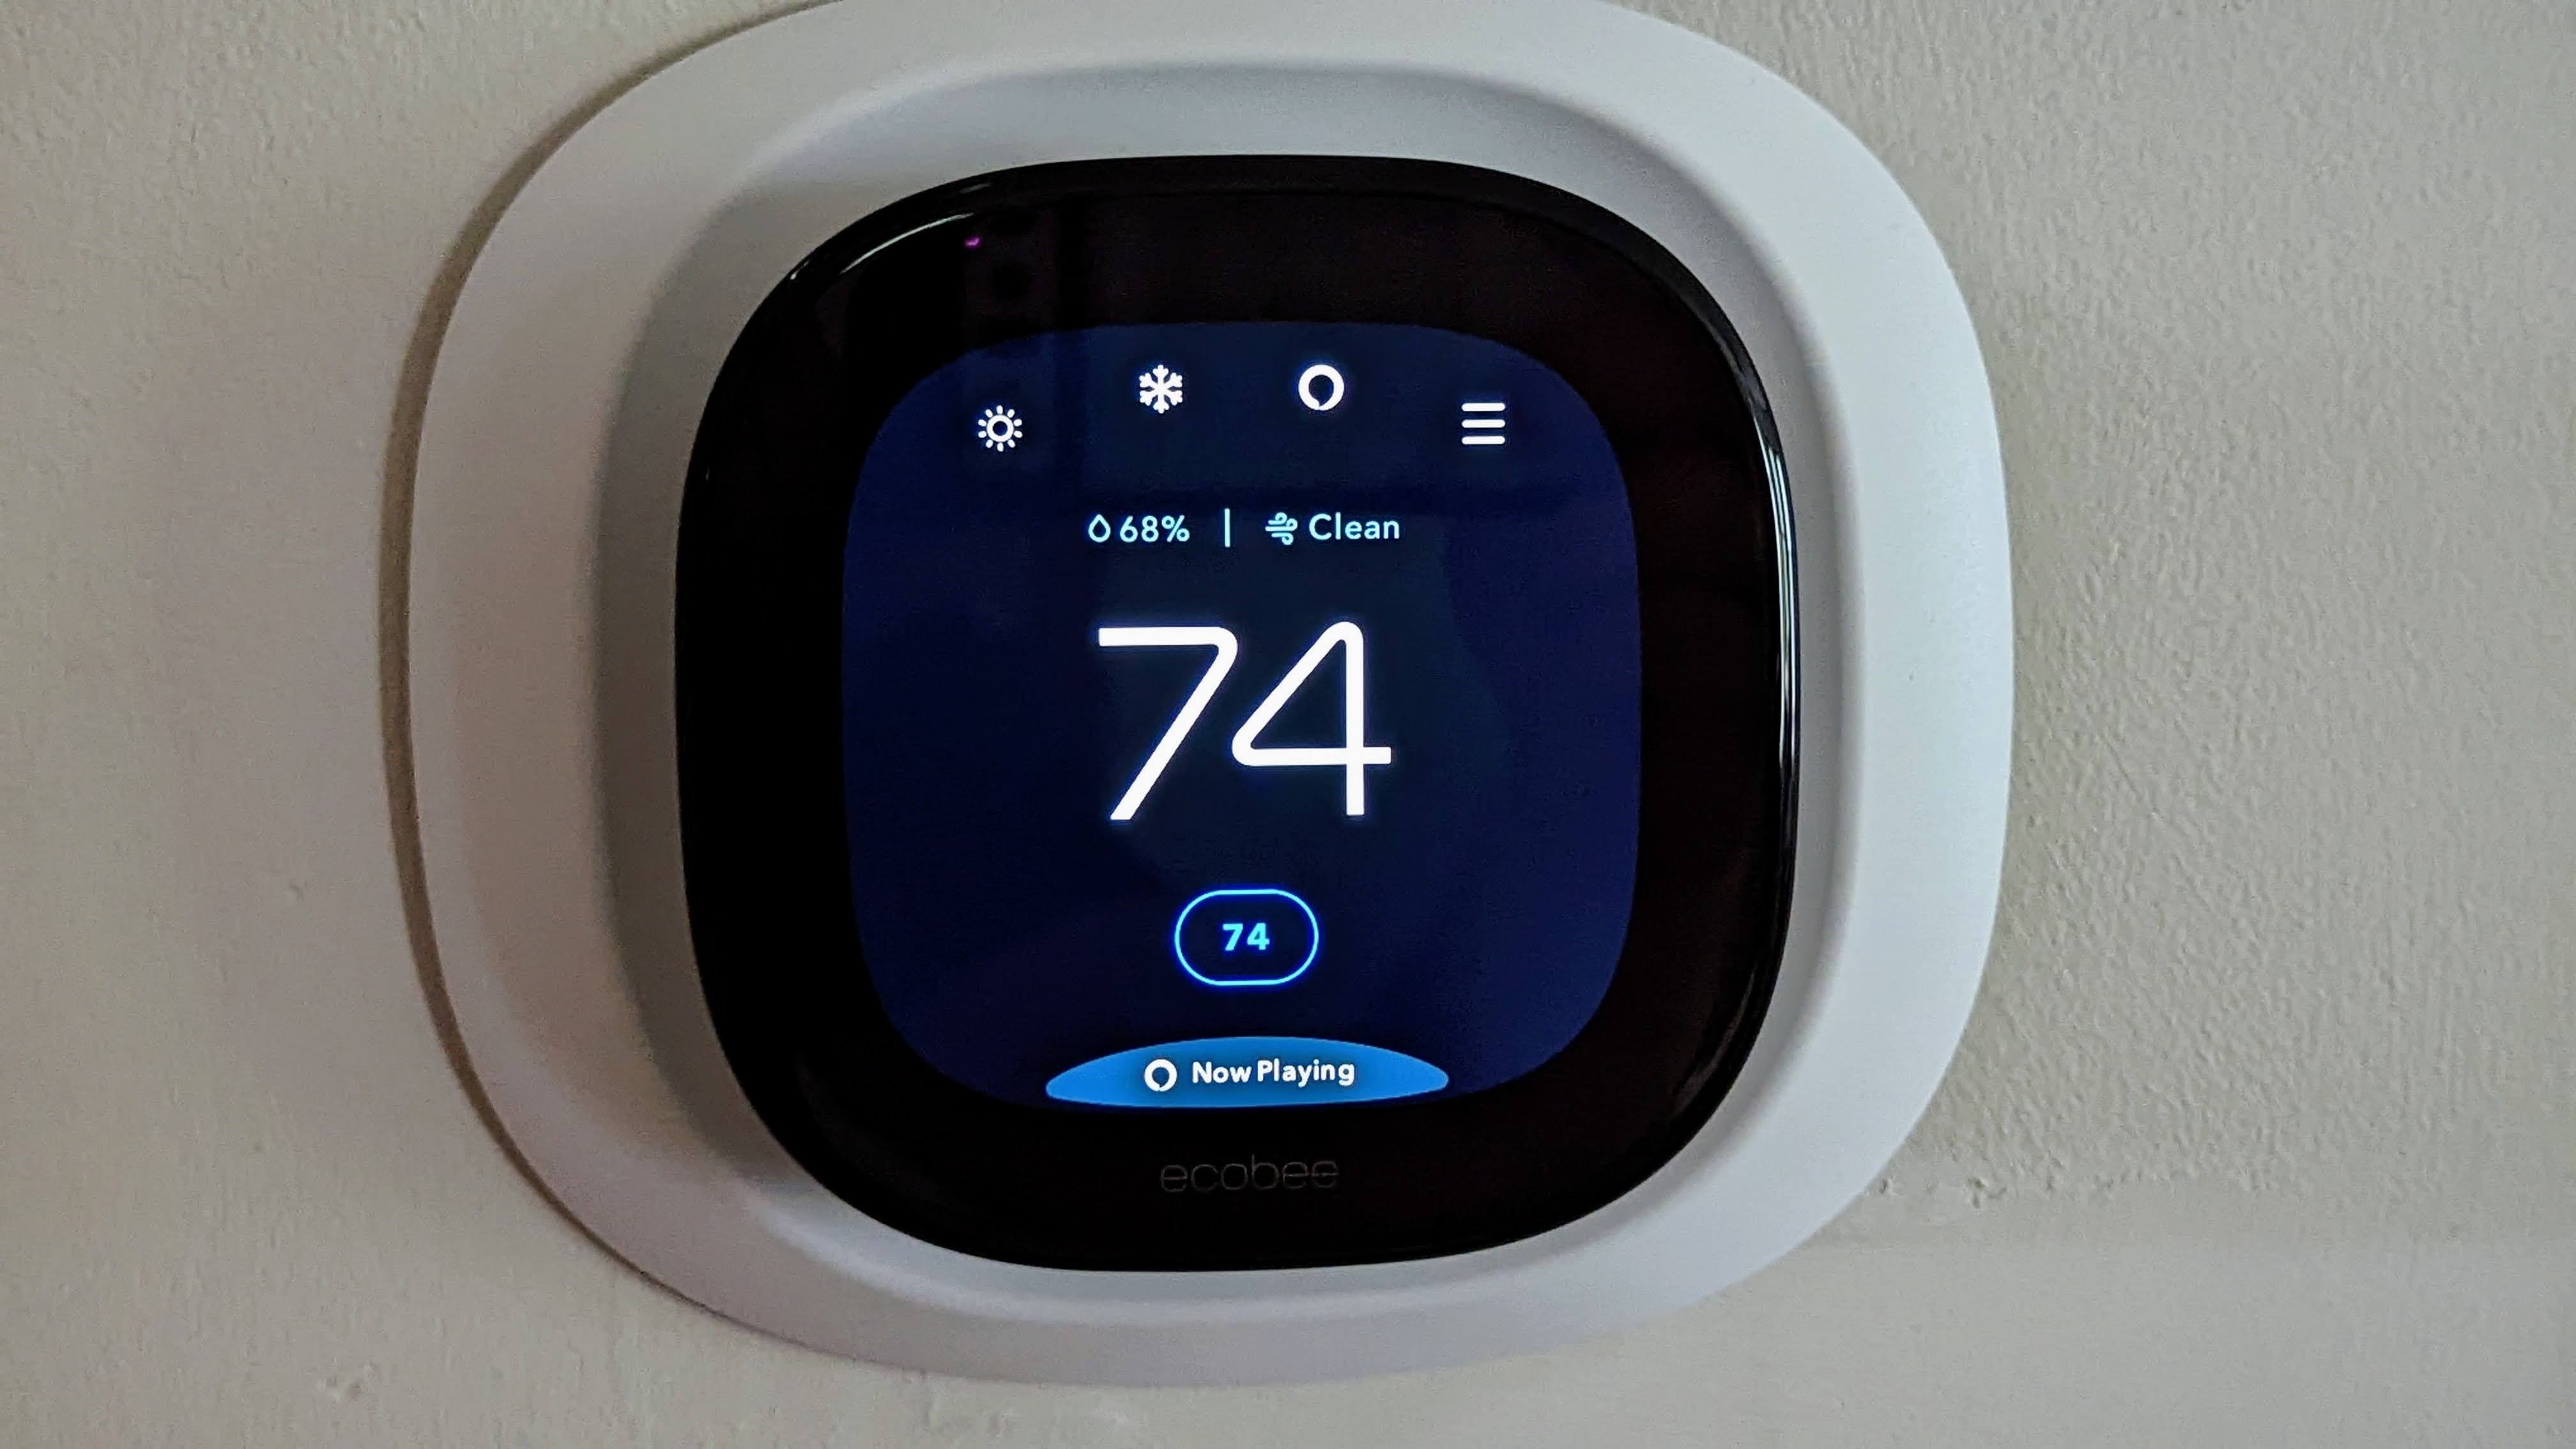 Google Nest Thermostat review: Affordable excellence - Android Authority